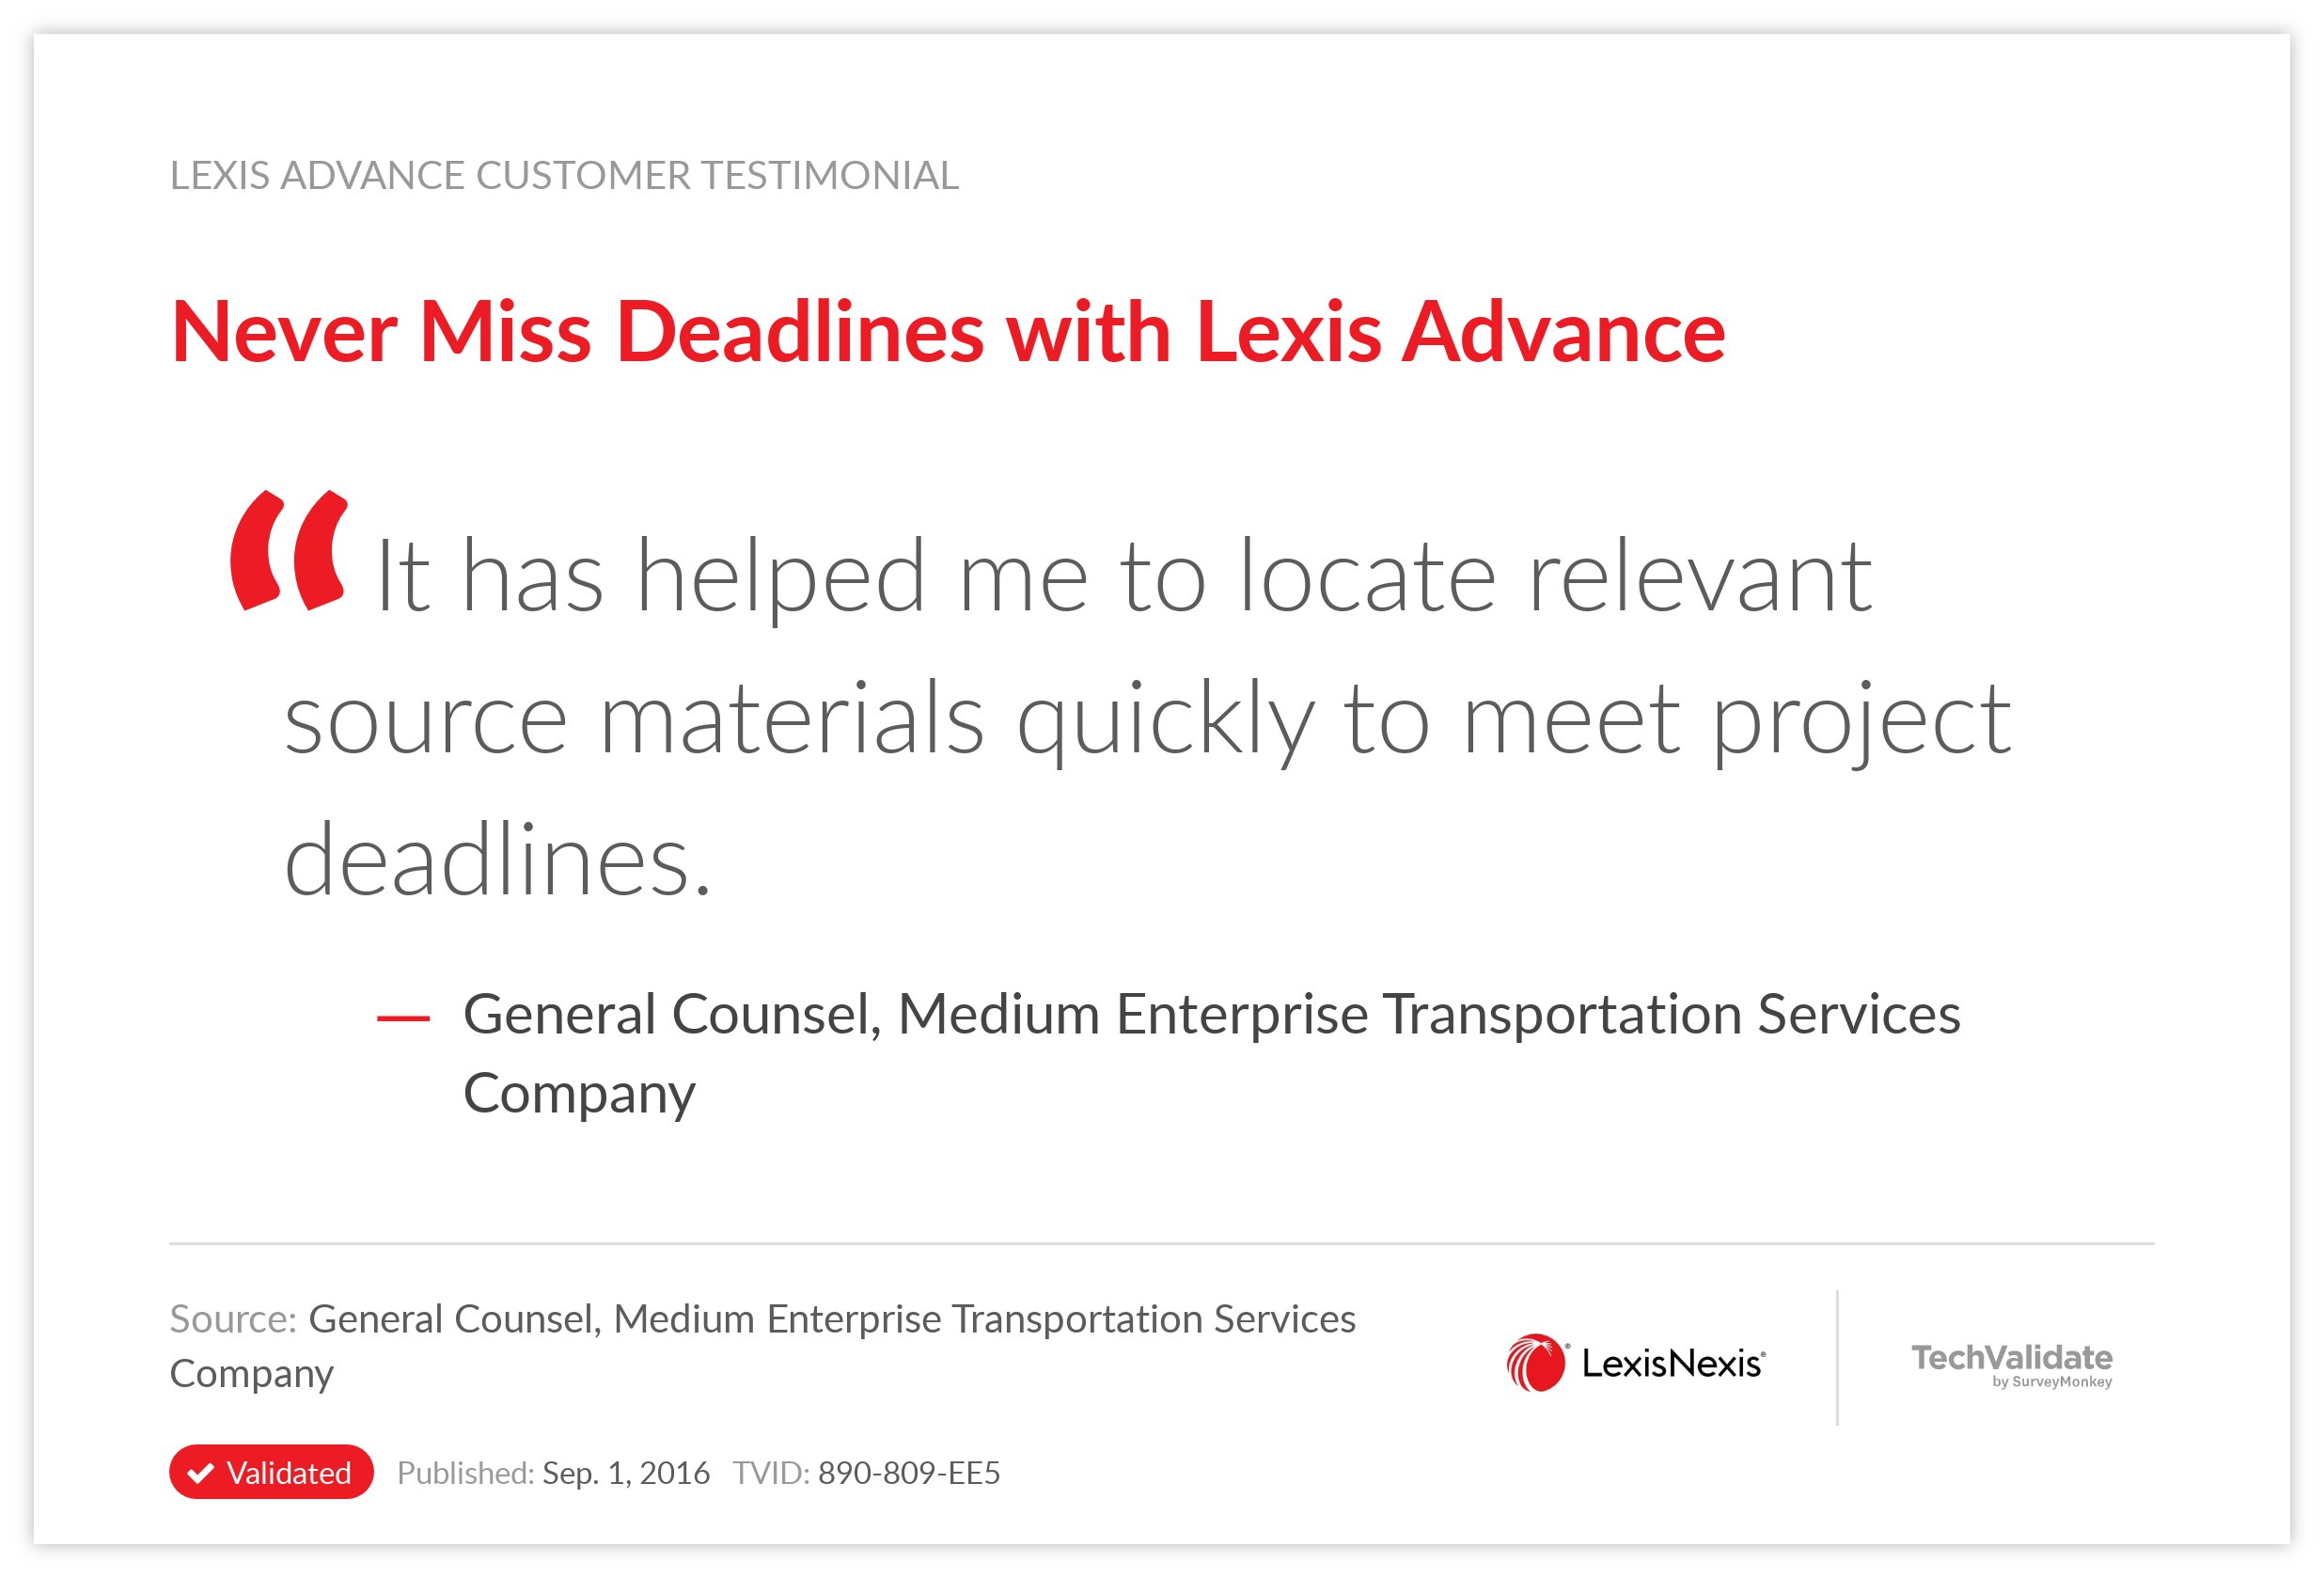 Never Miss Deadlines with Lexis Advance